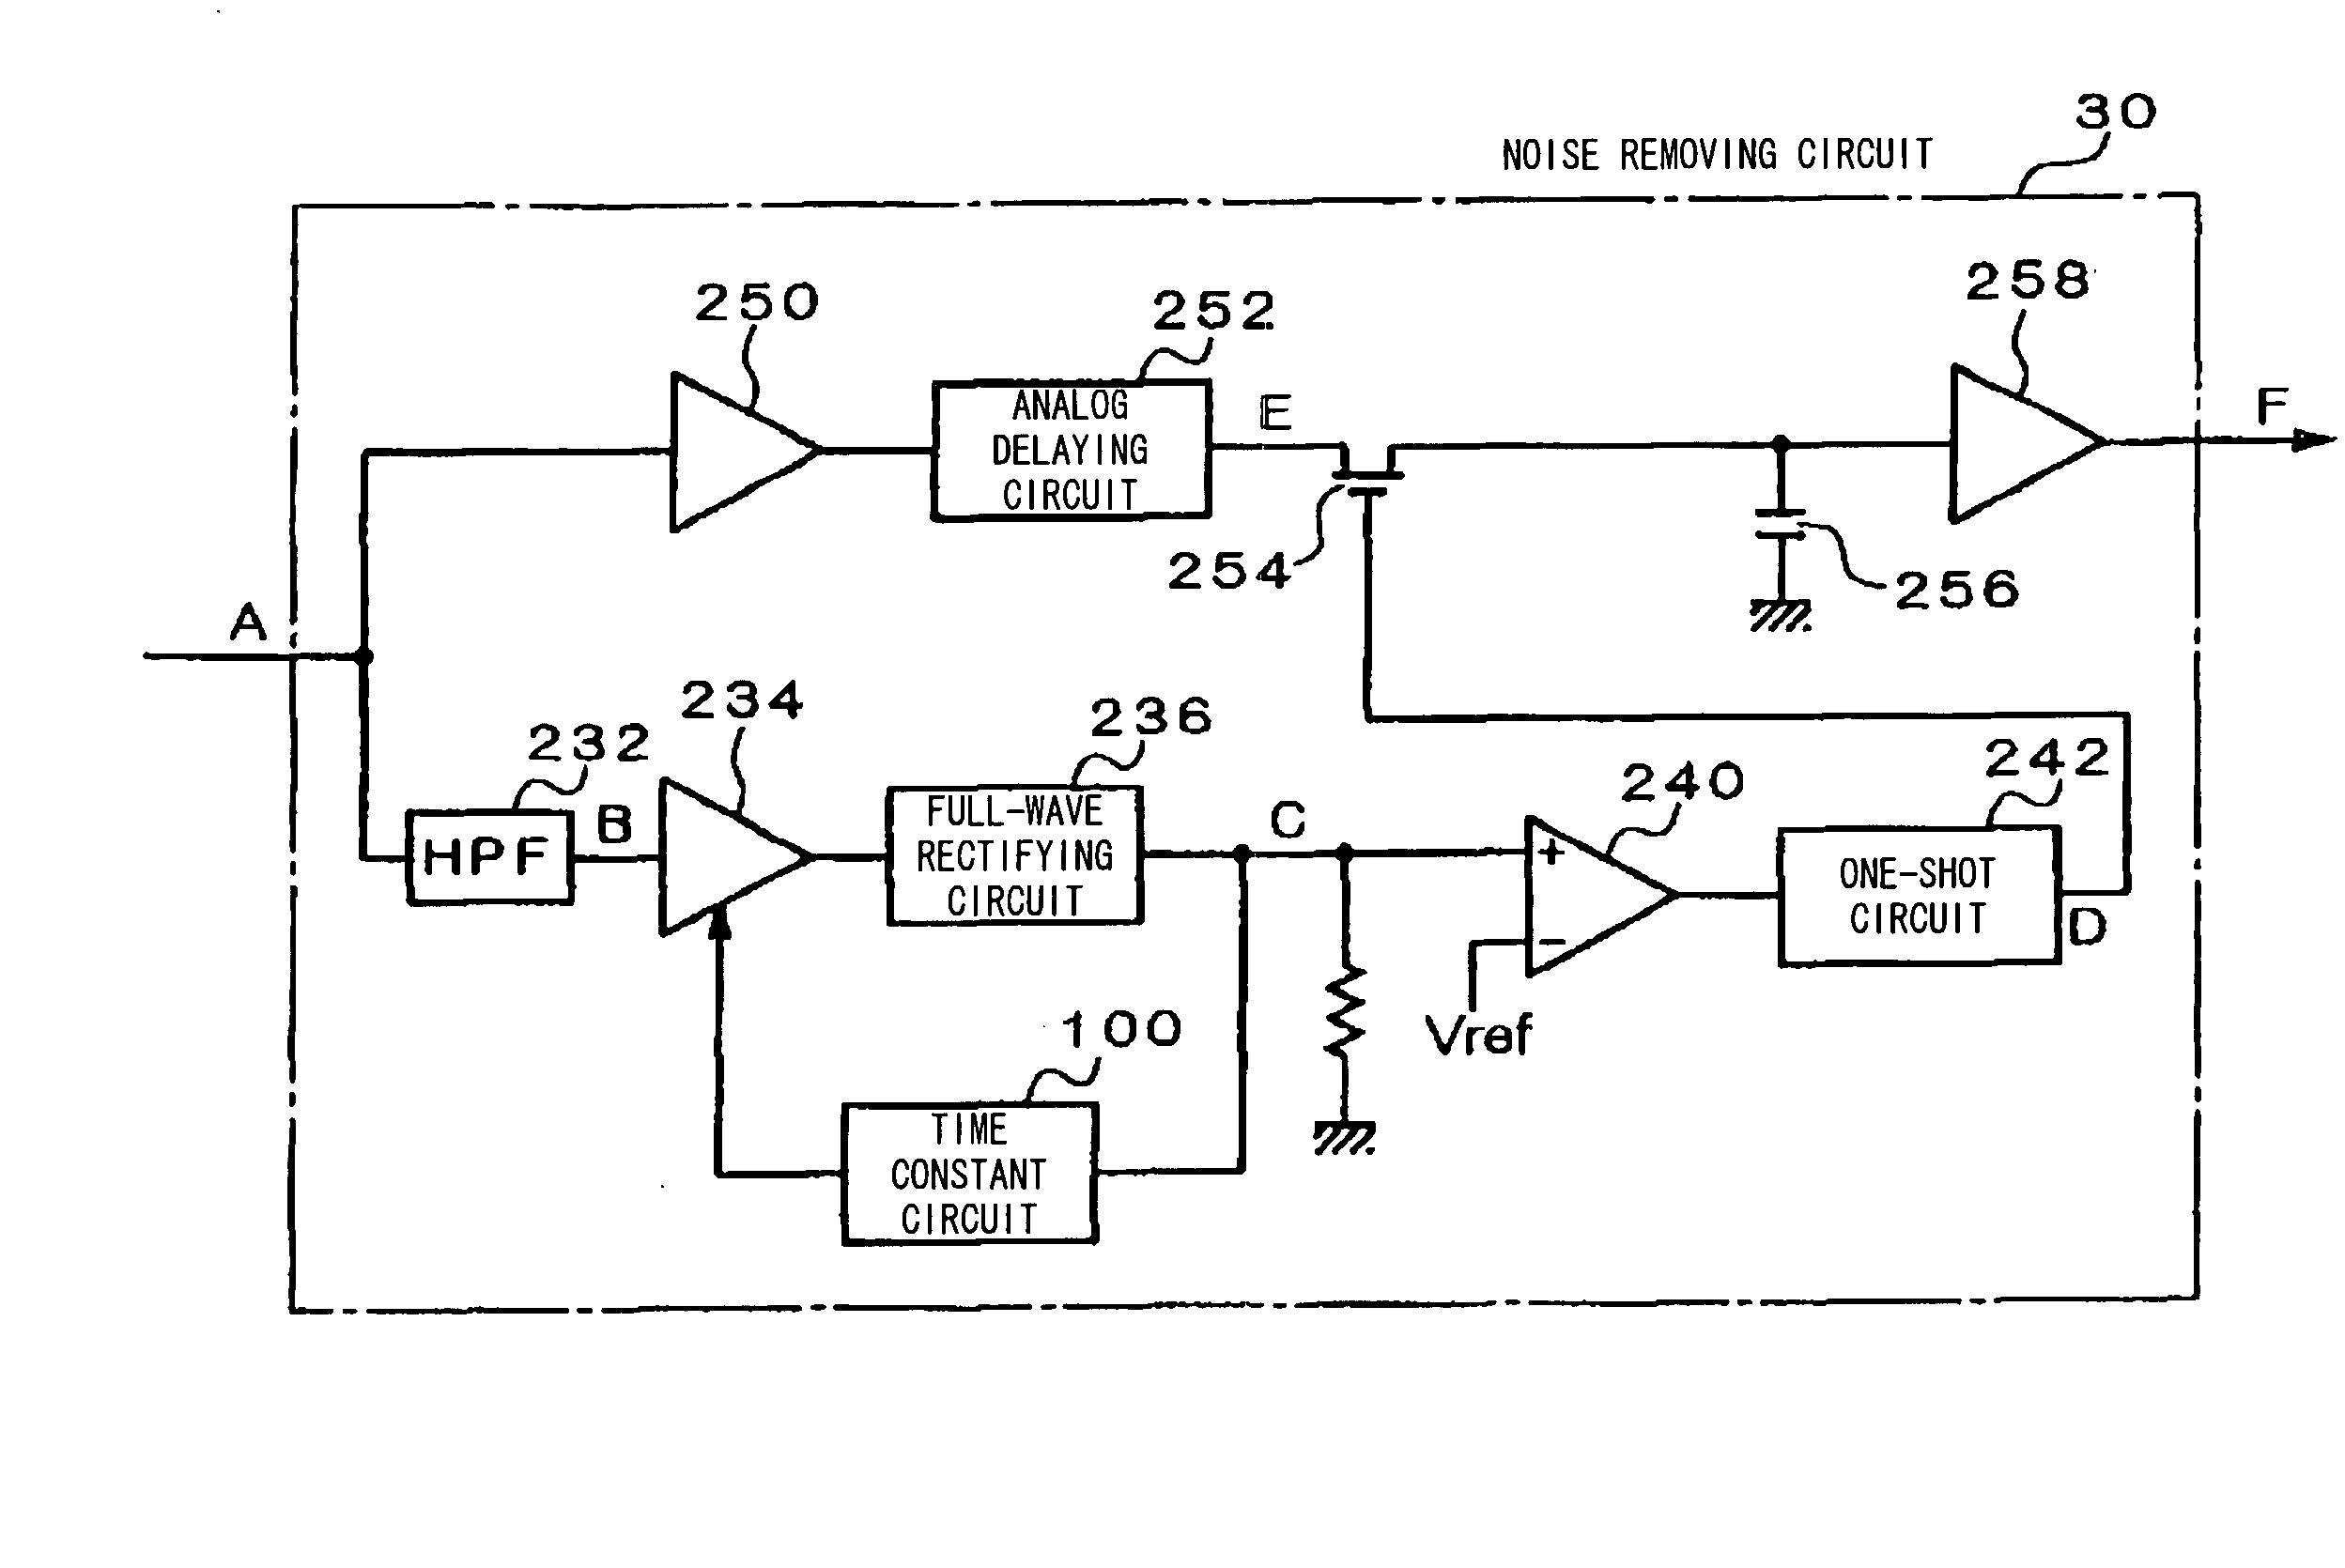 Noise filter circuit